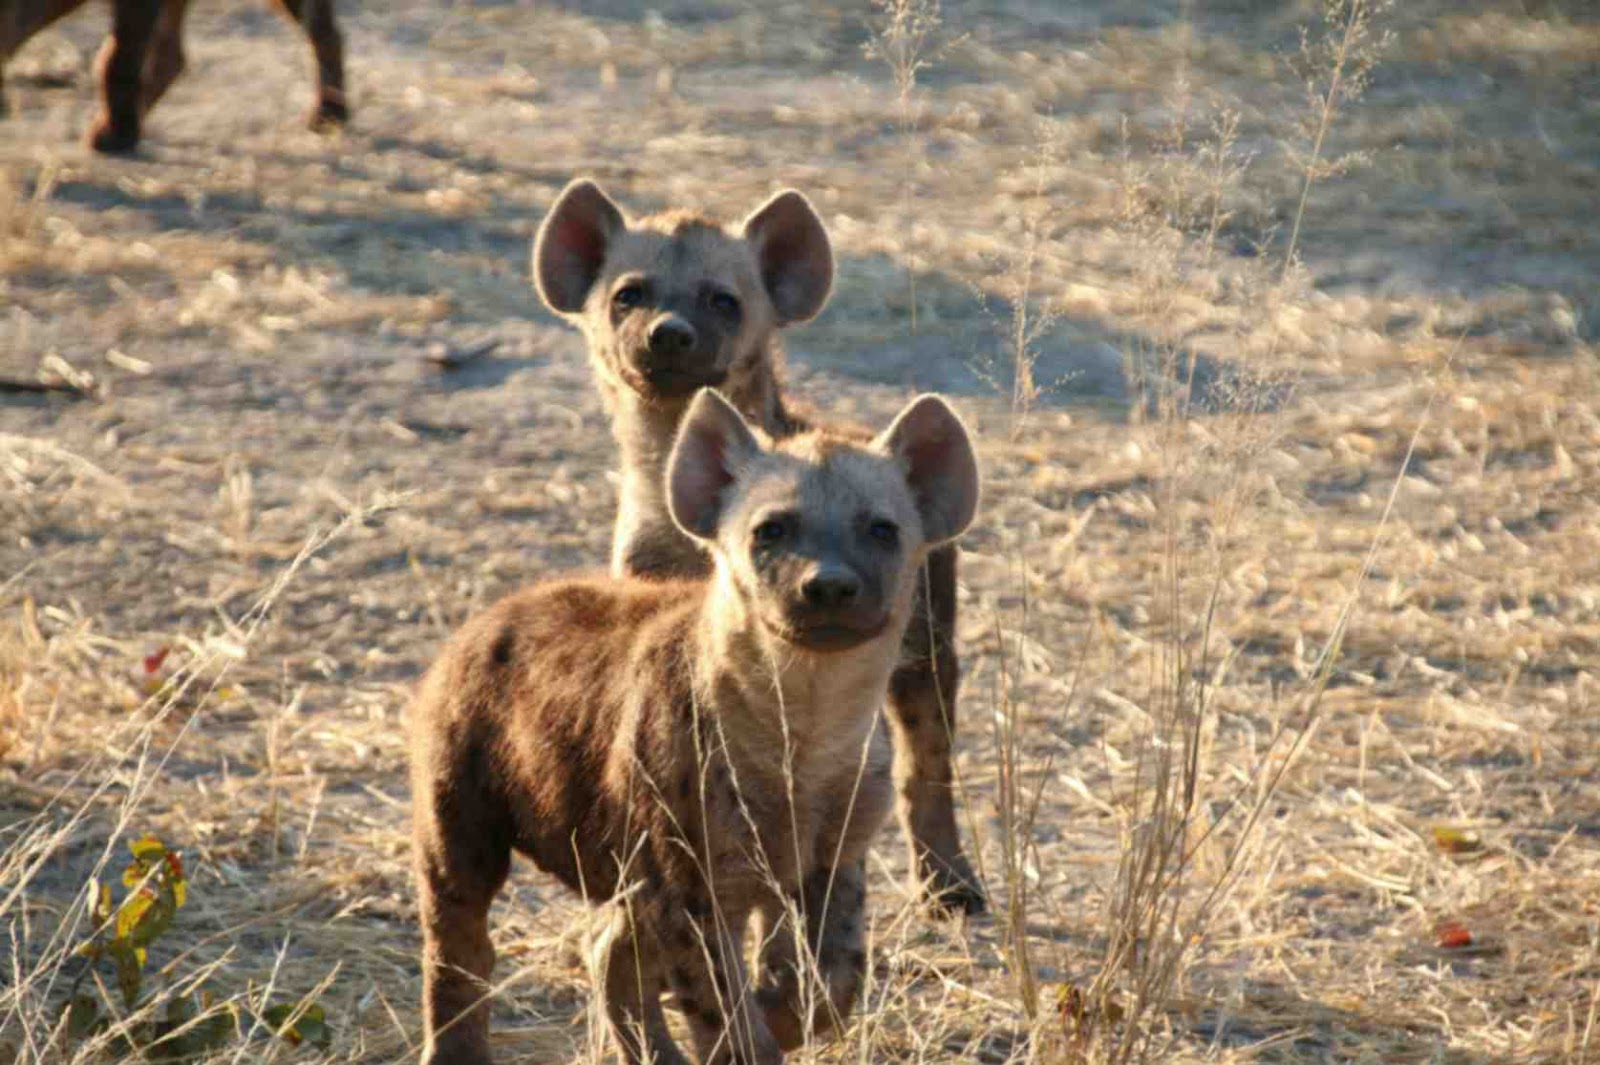 spotted hyenas and brown hyenas from Chobe National Park.